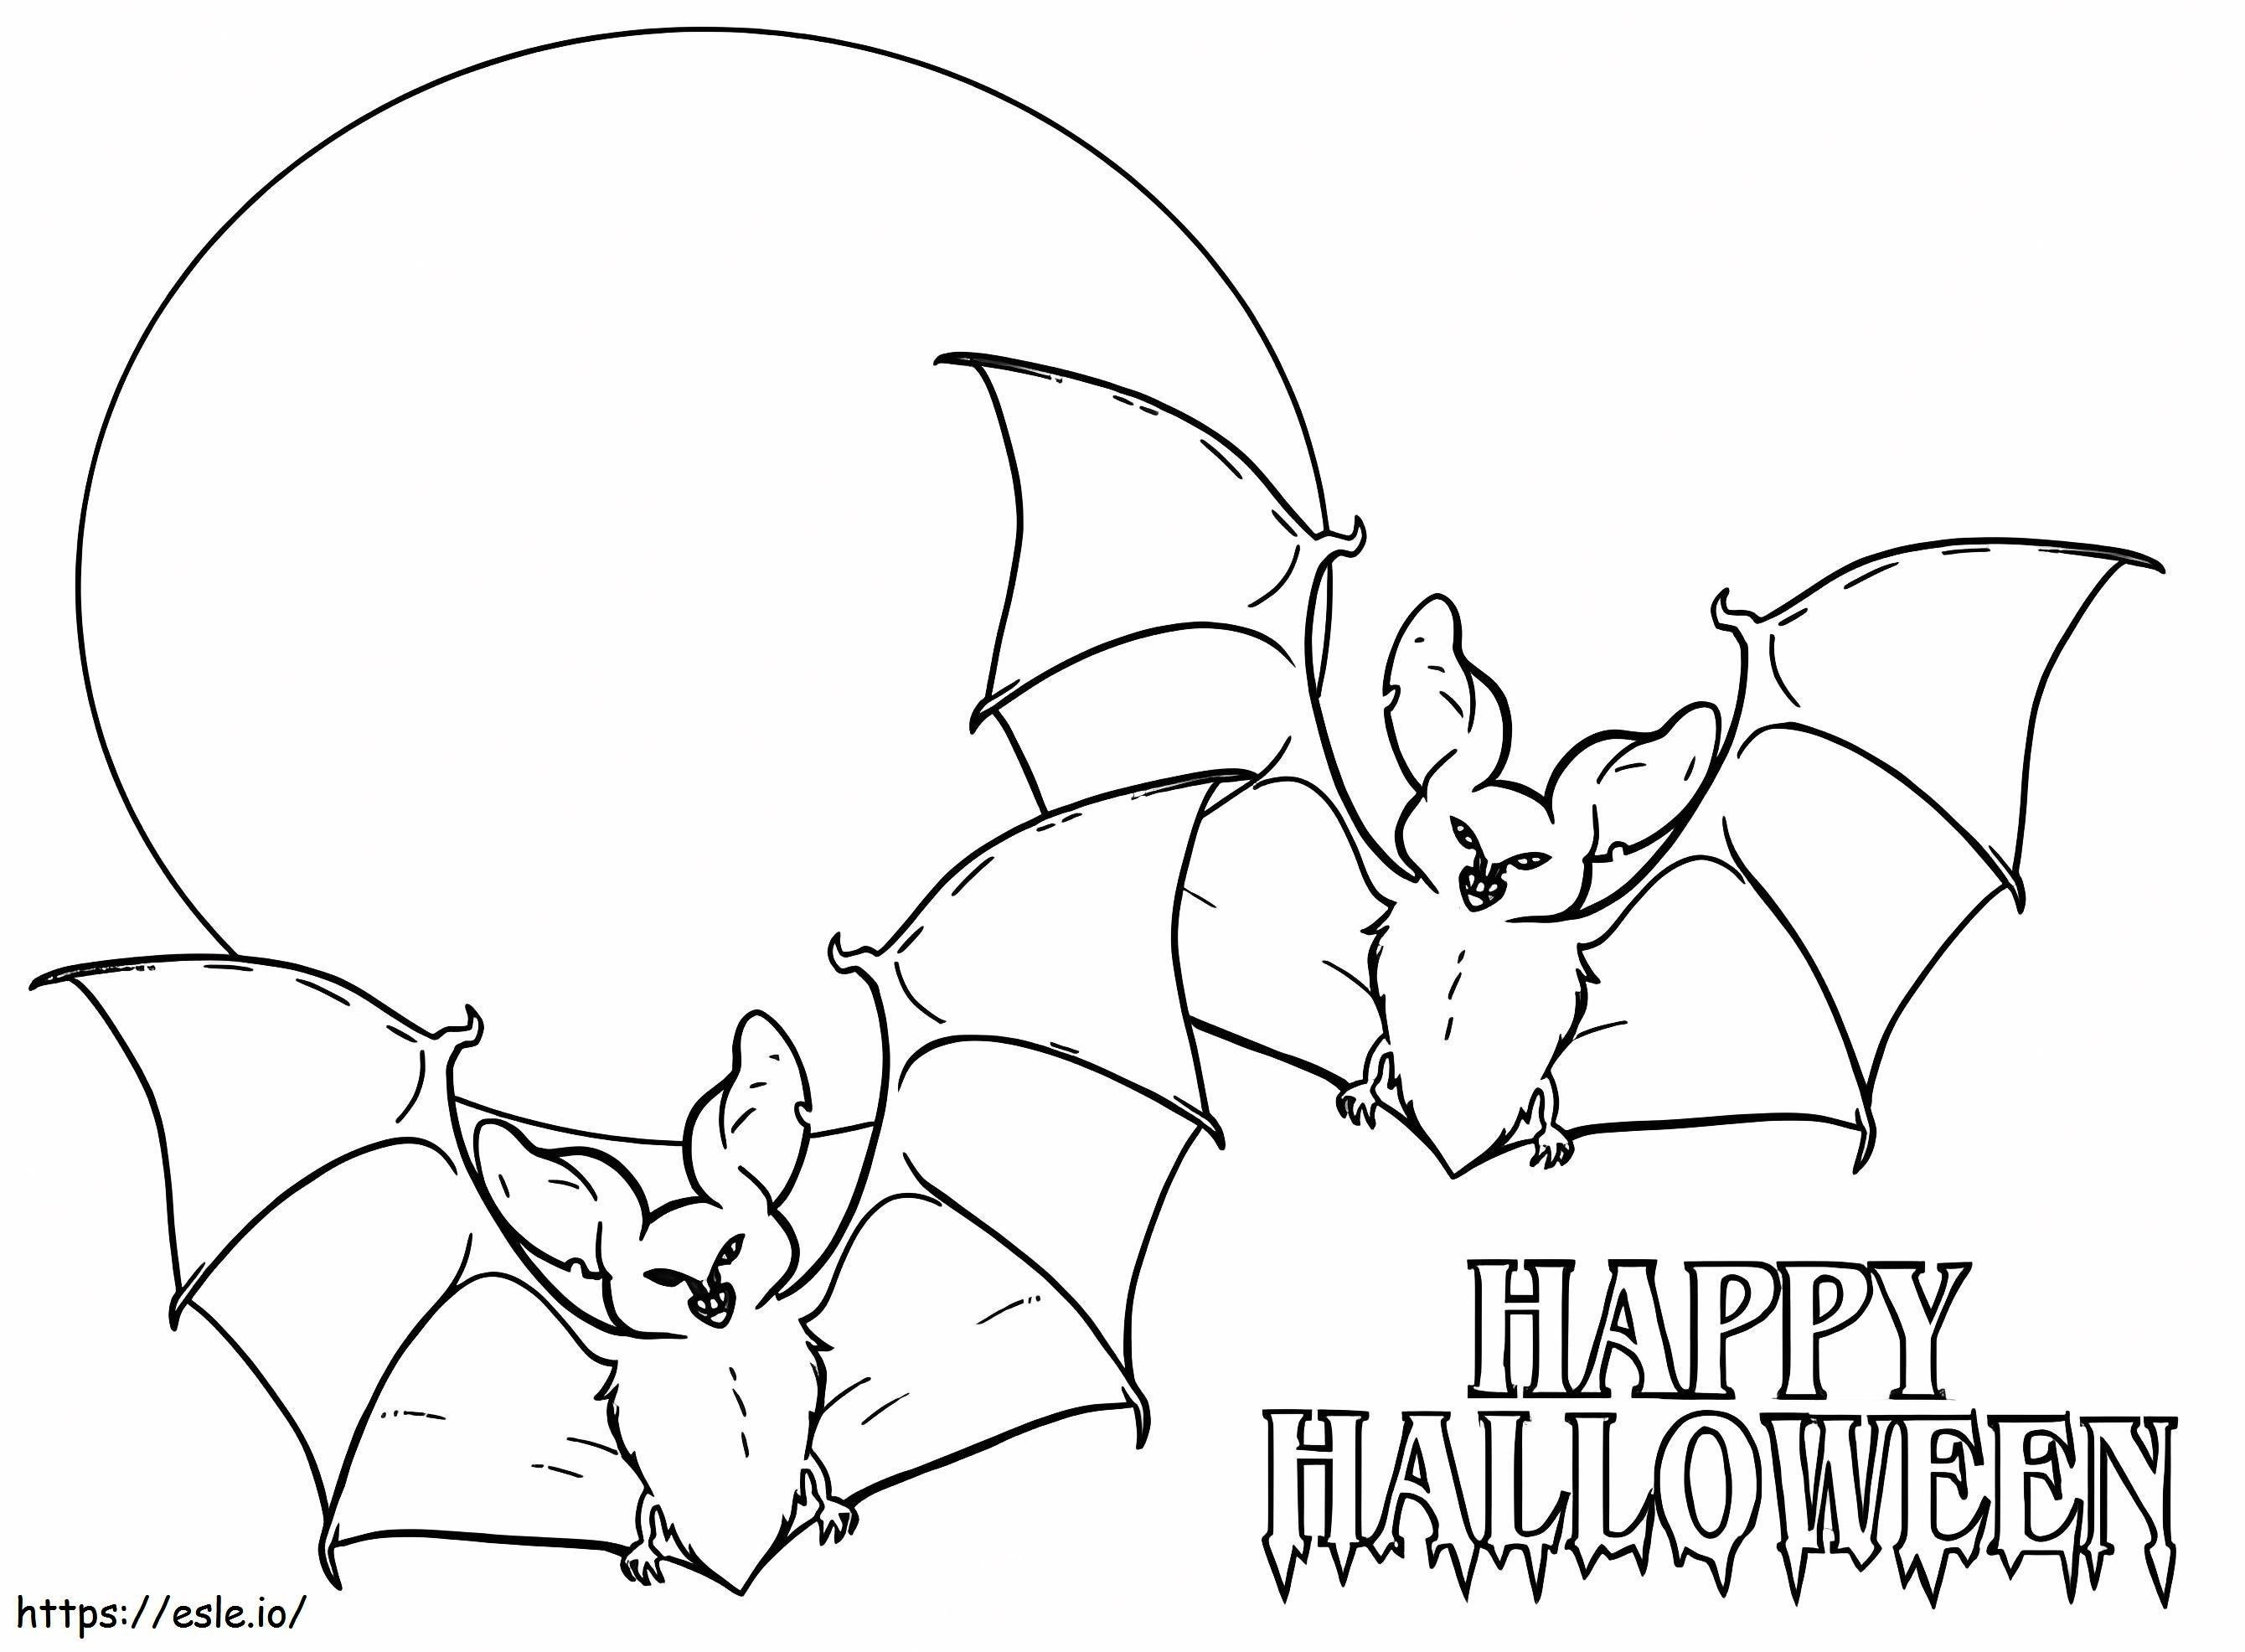 Two Happy Halloween Bats coloring page